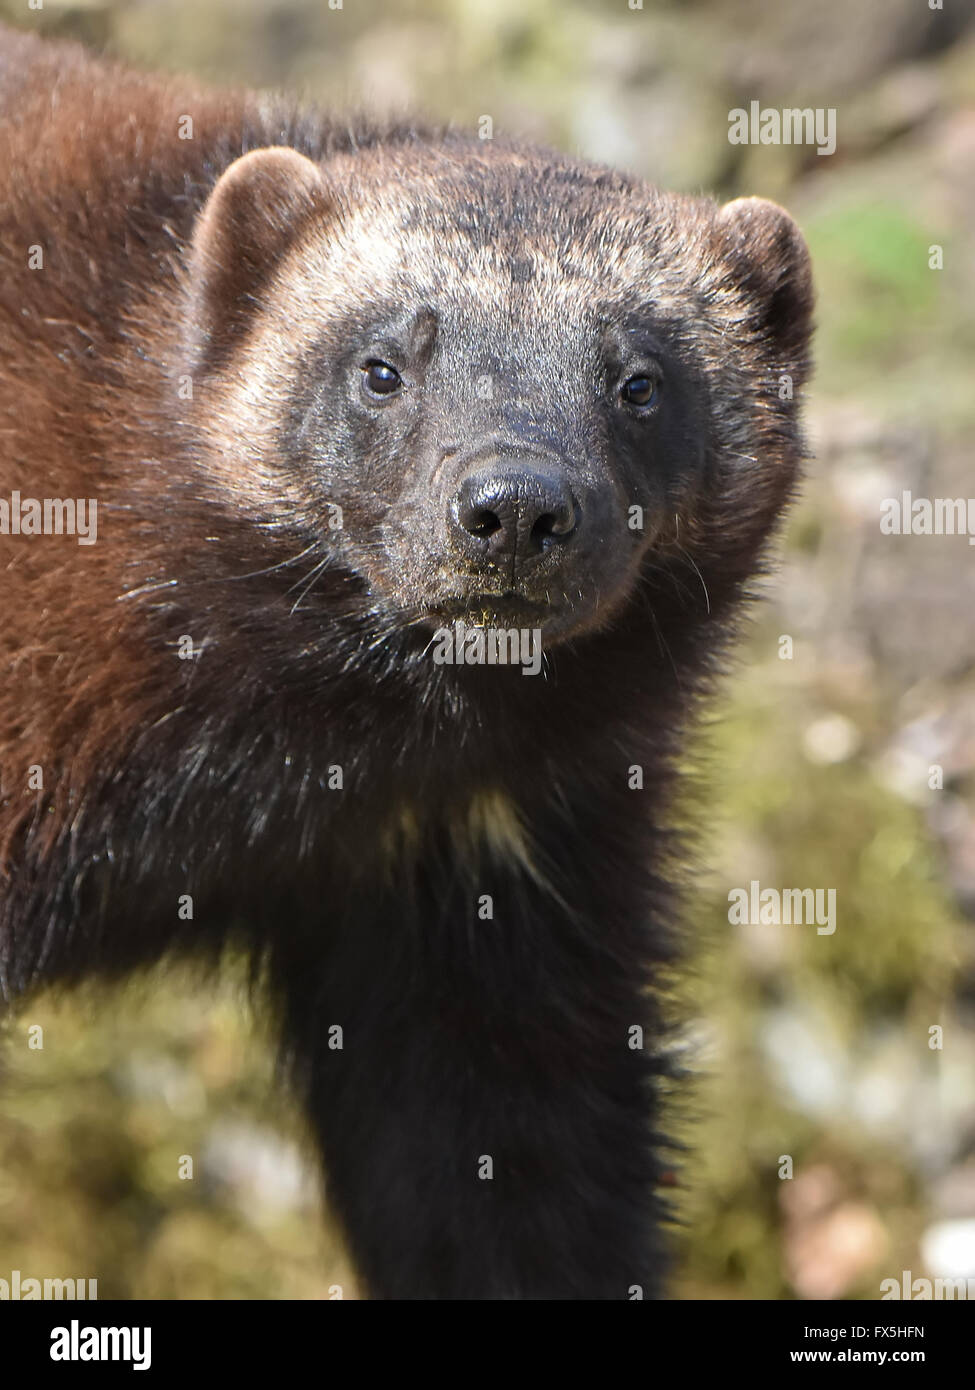 Closeup portrait of the wolverine seen from the front Stock Photo